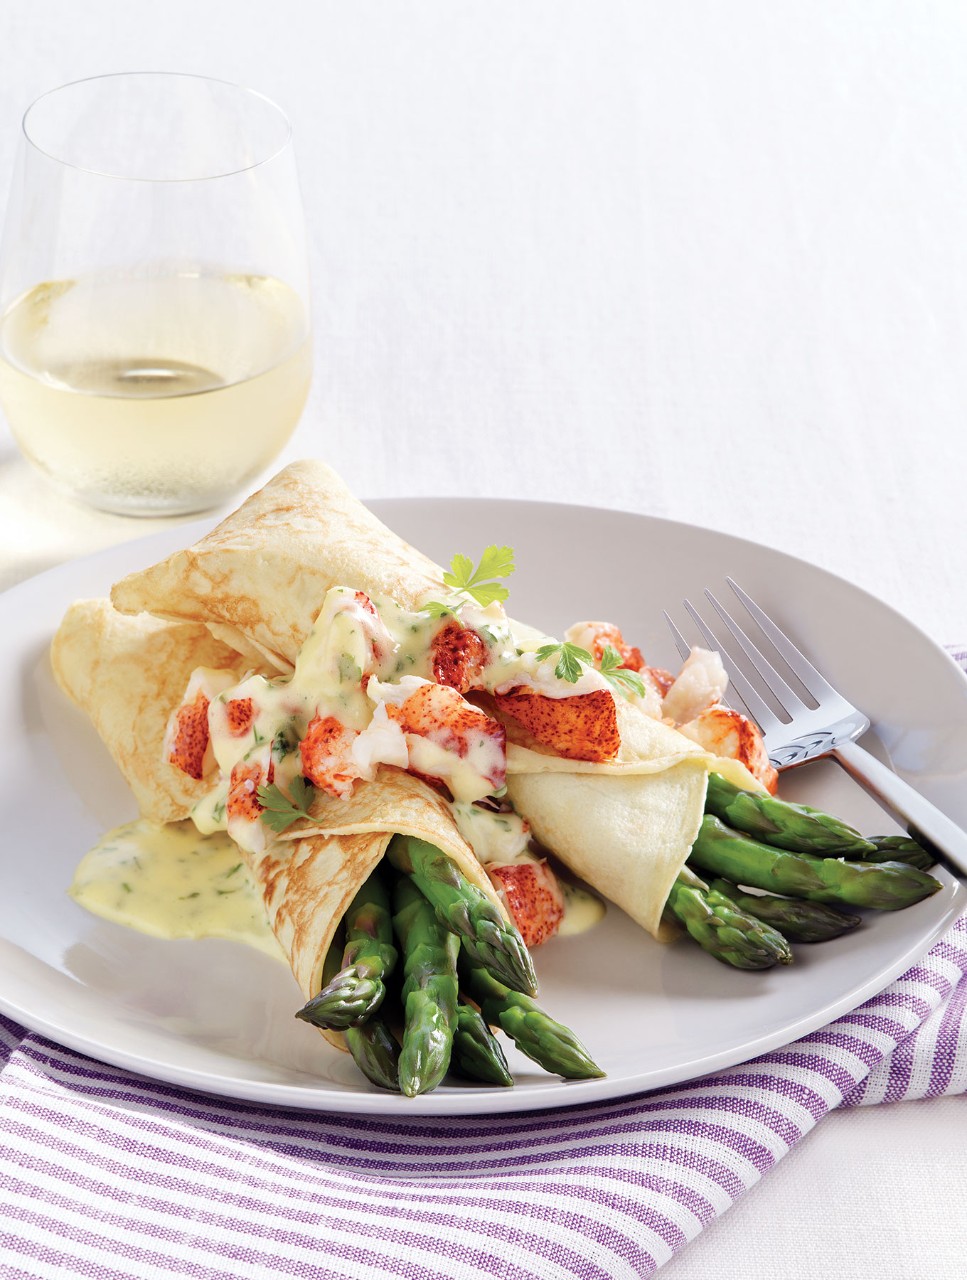 Asparagus & Lobster Crepes with Fines Herbes Hollandaise Sauce